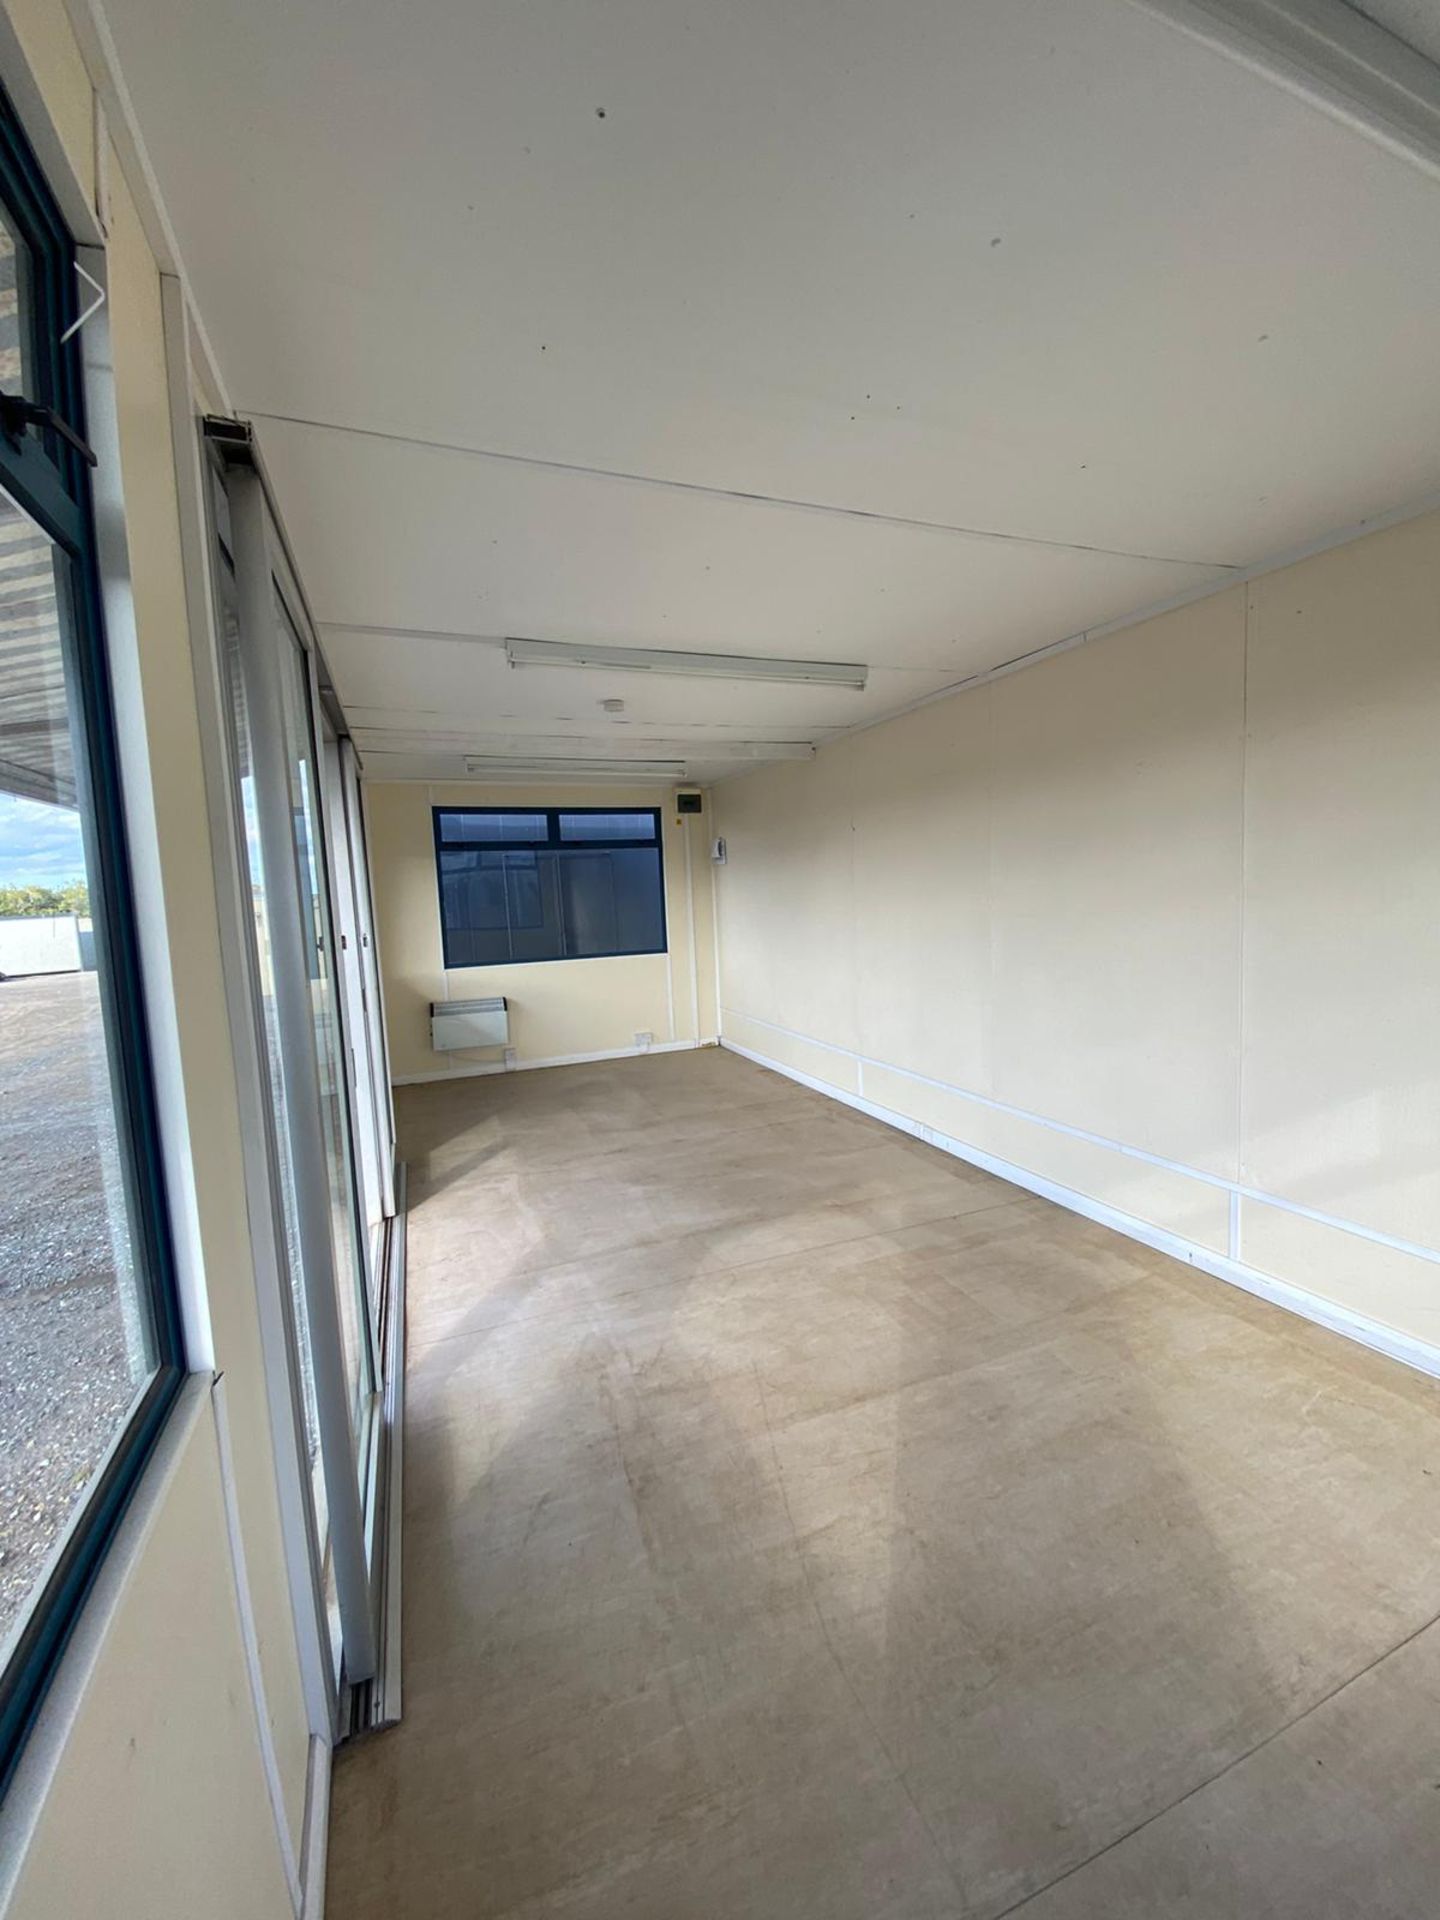 24ft marketing Suite - Image 11 of 15